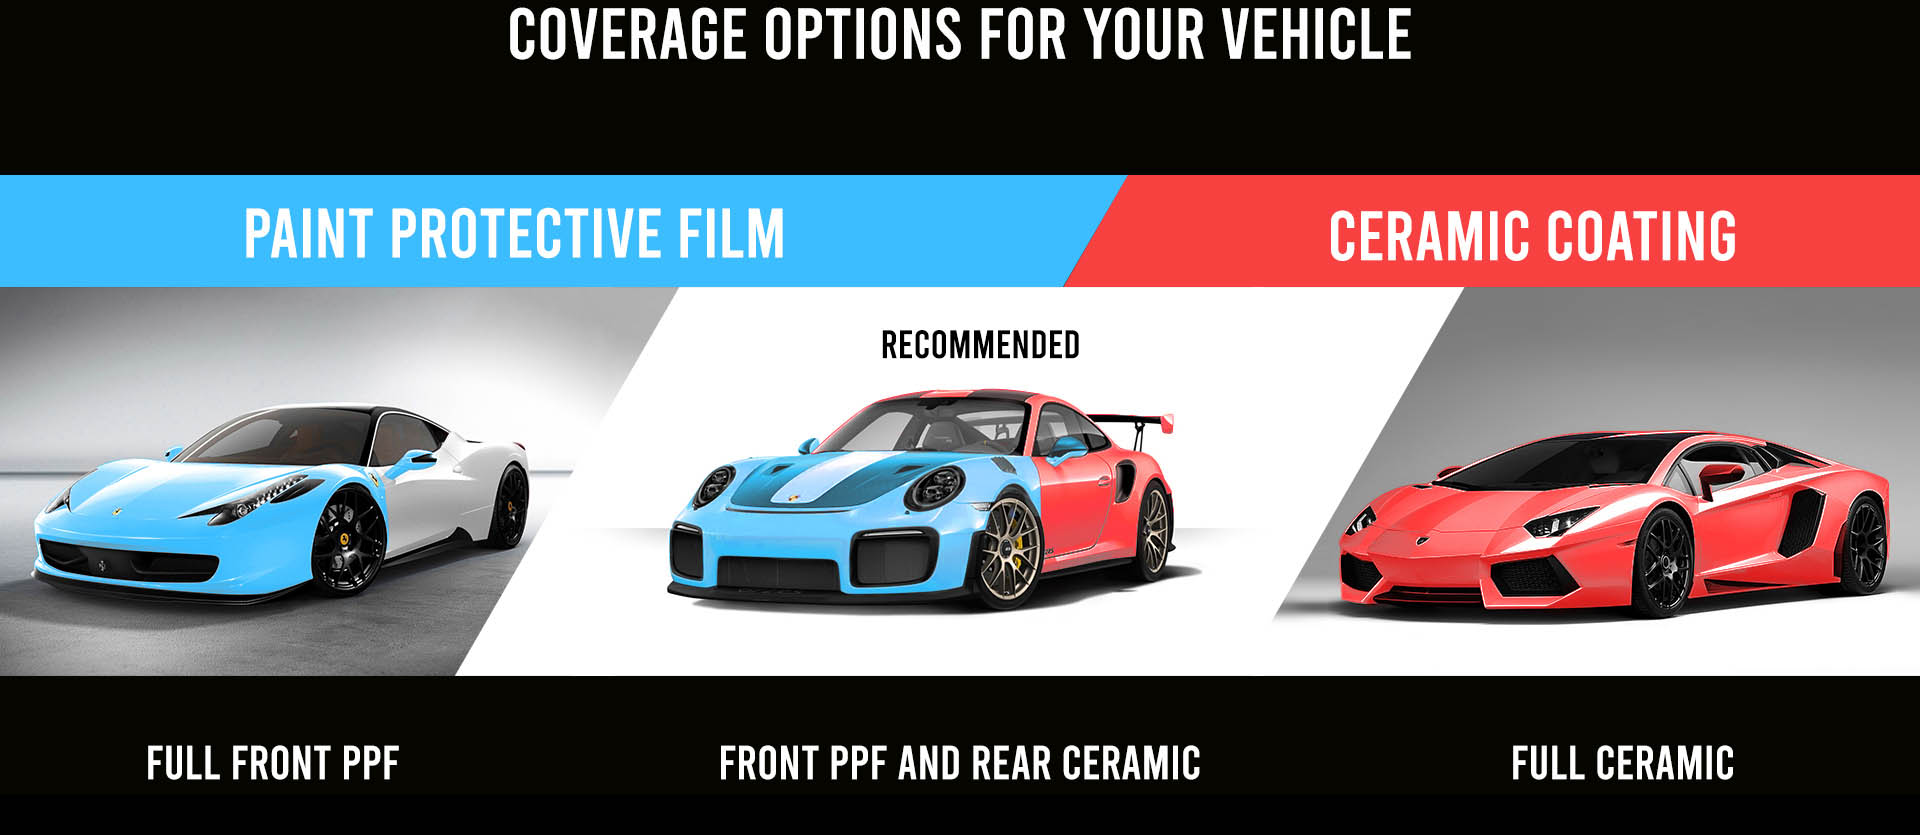 Car Coverage Options